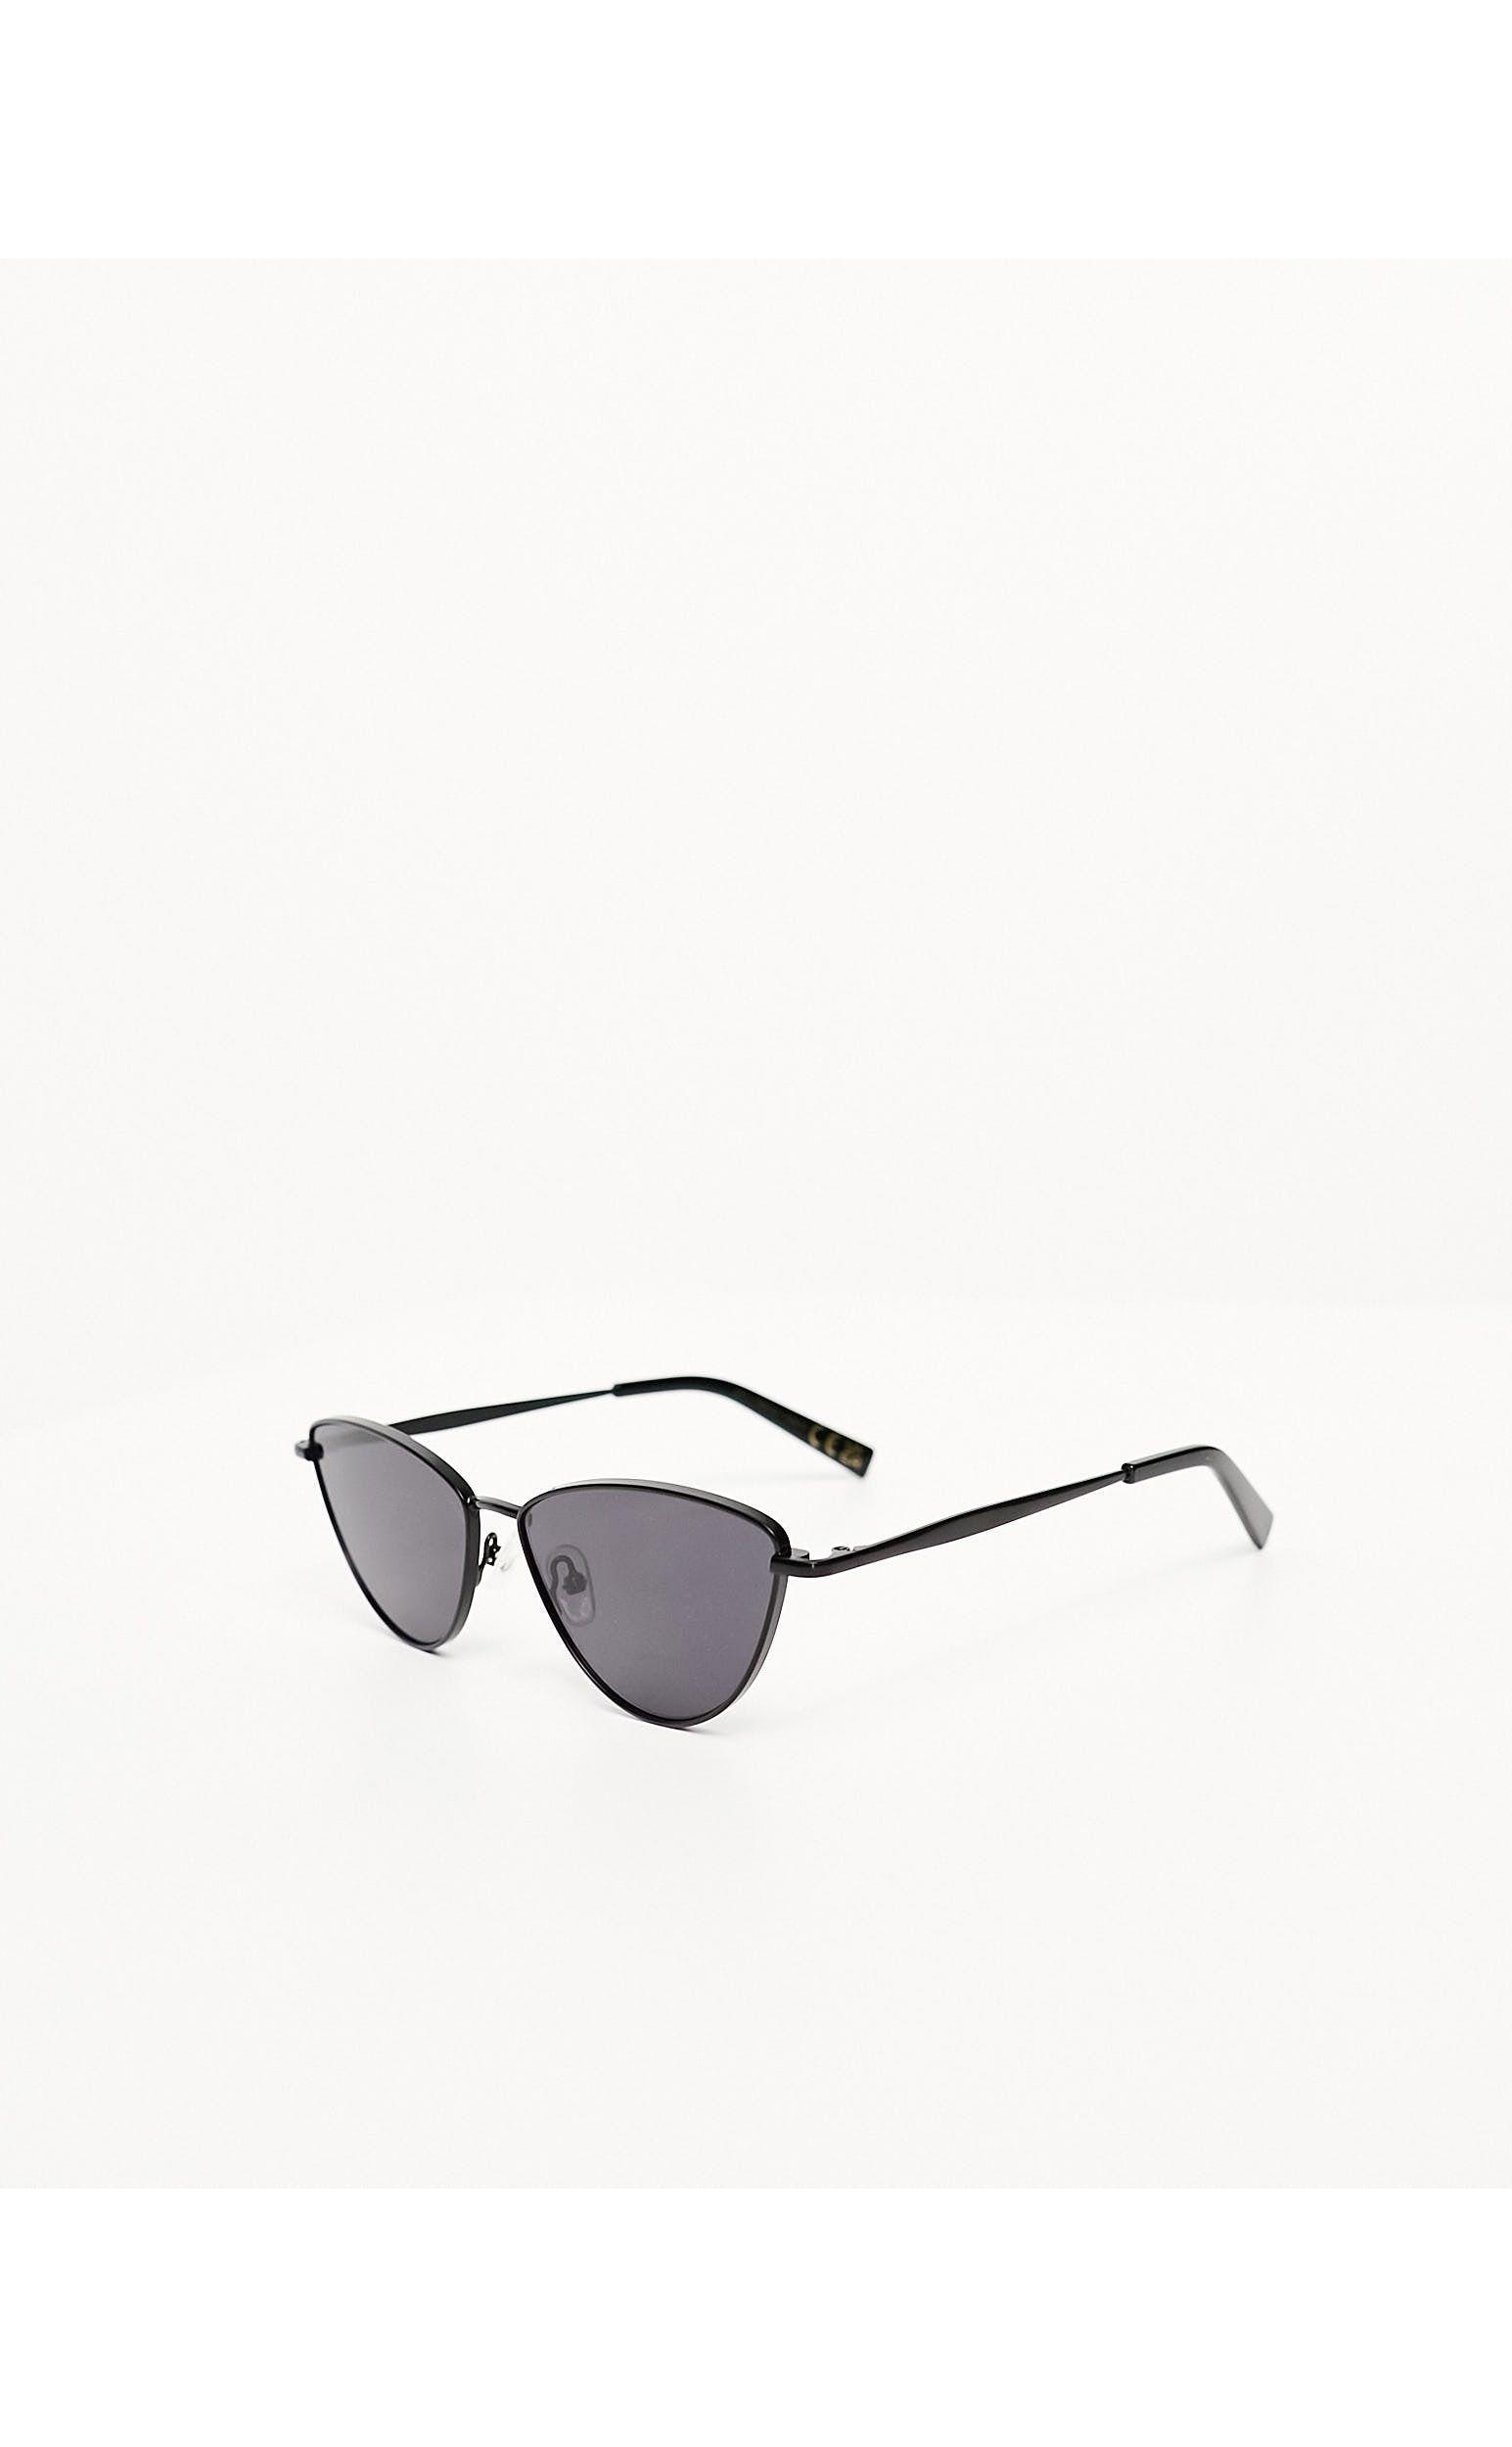 & Other Stories Cat-eye Sunglasses in Black | Lyst